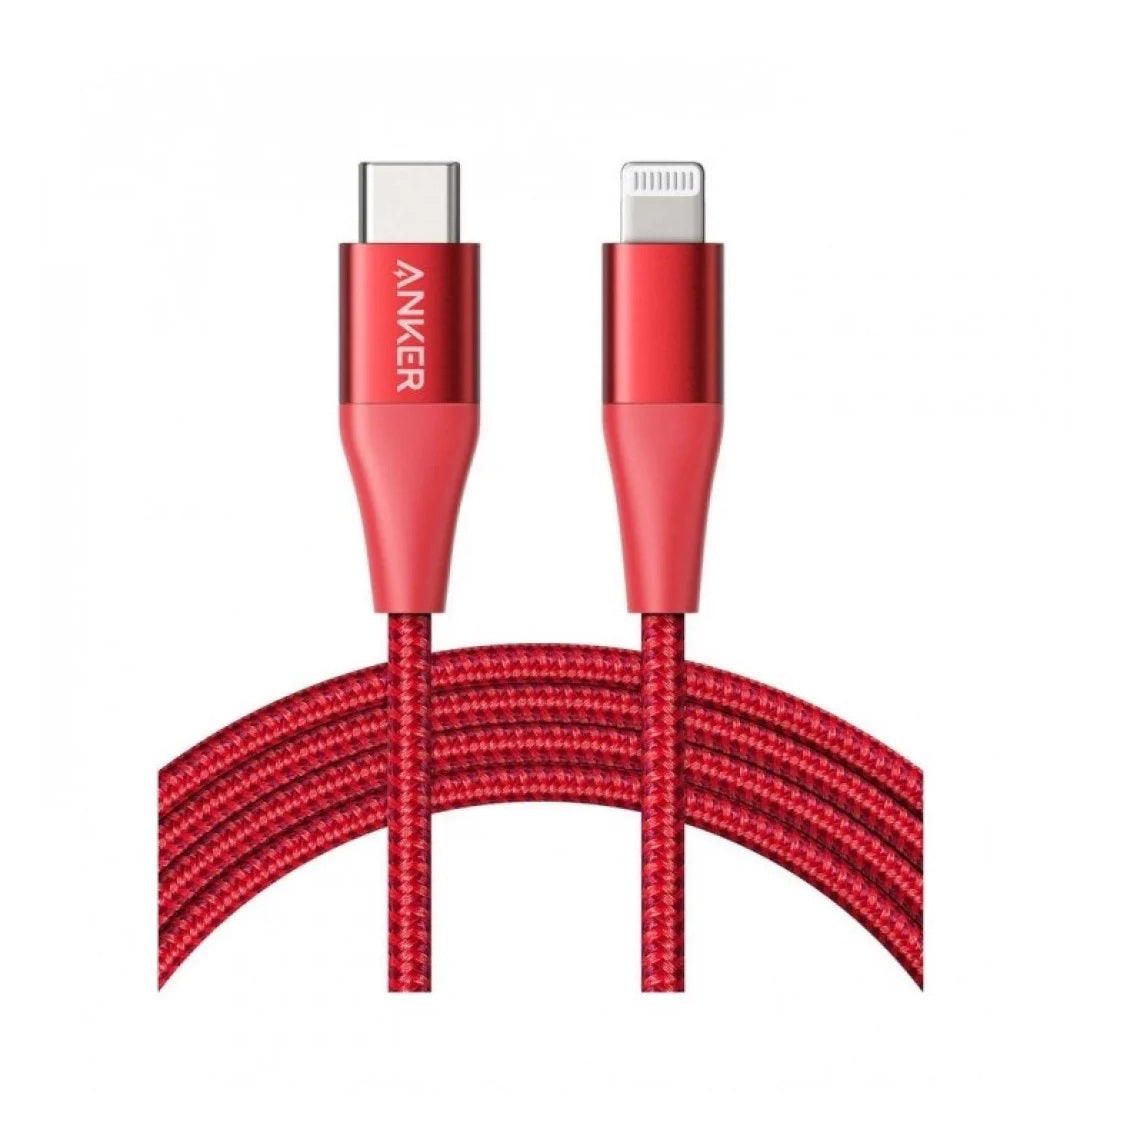 ANKER POWERLINE+ II 0.9M USB-C TO LIGHTNING CABLE - RED